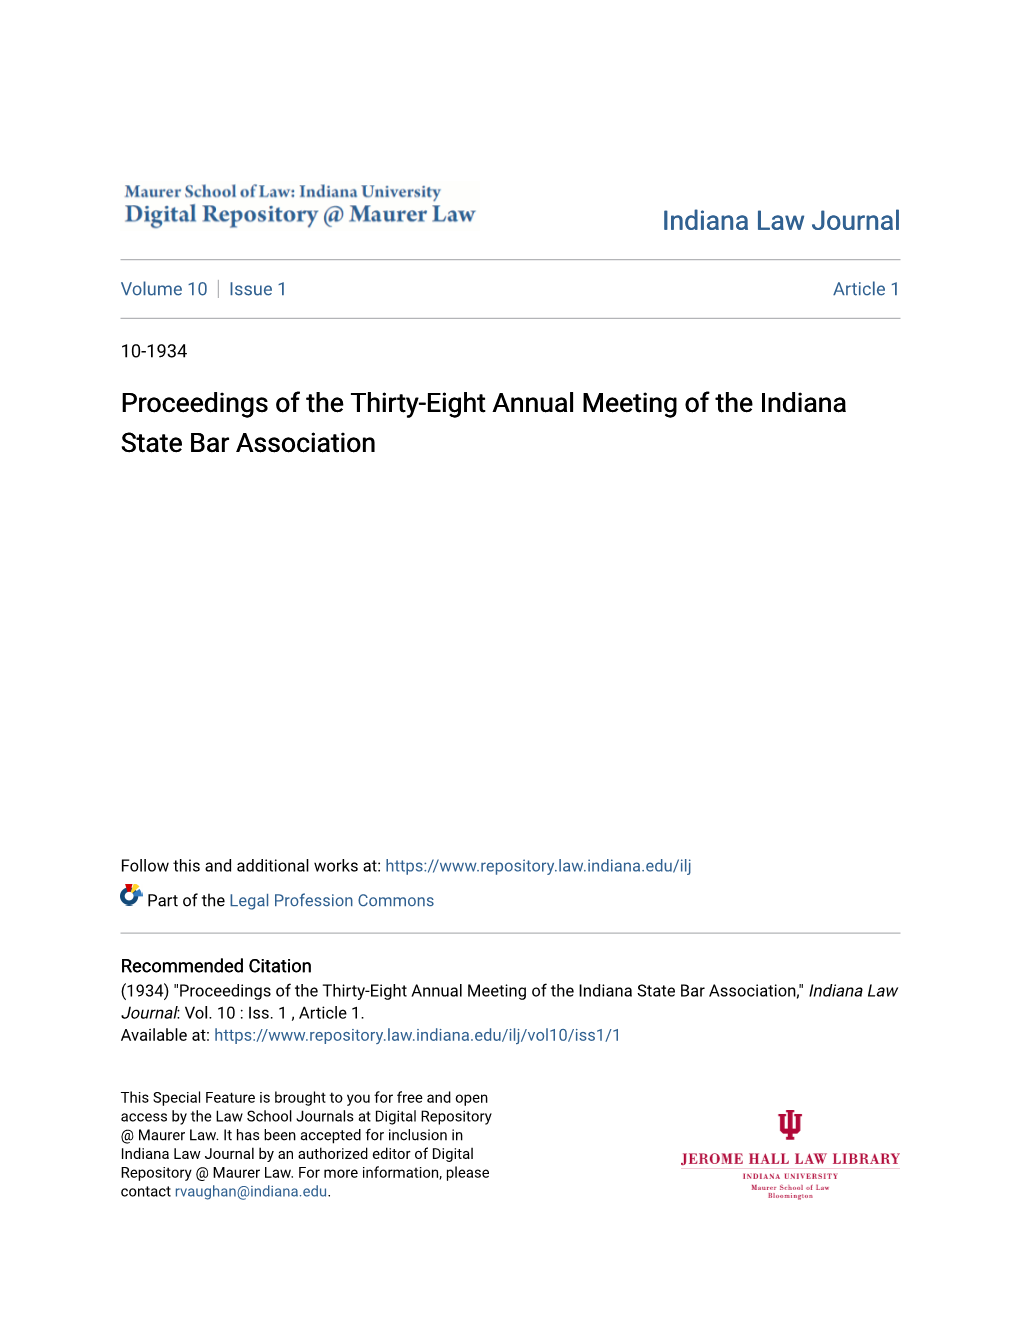 Proceedings of the Thirty-Eight Annual Meeting of the Indiana State Bar Association